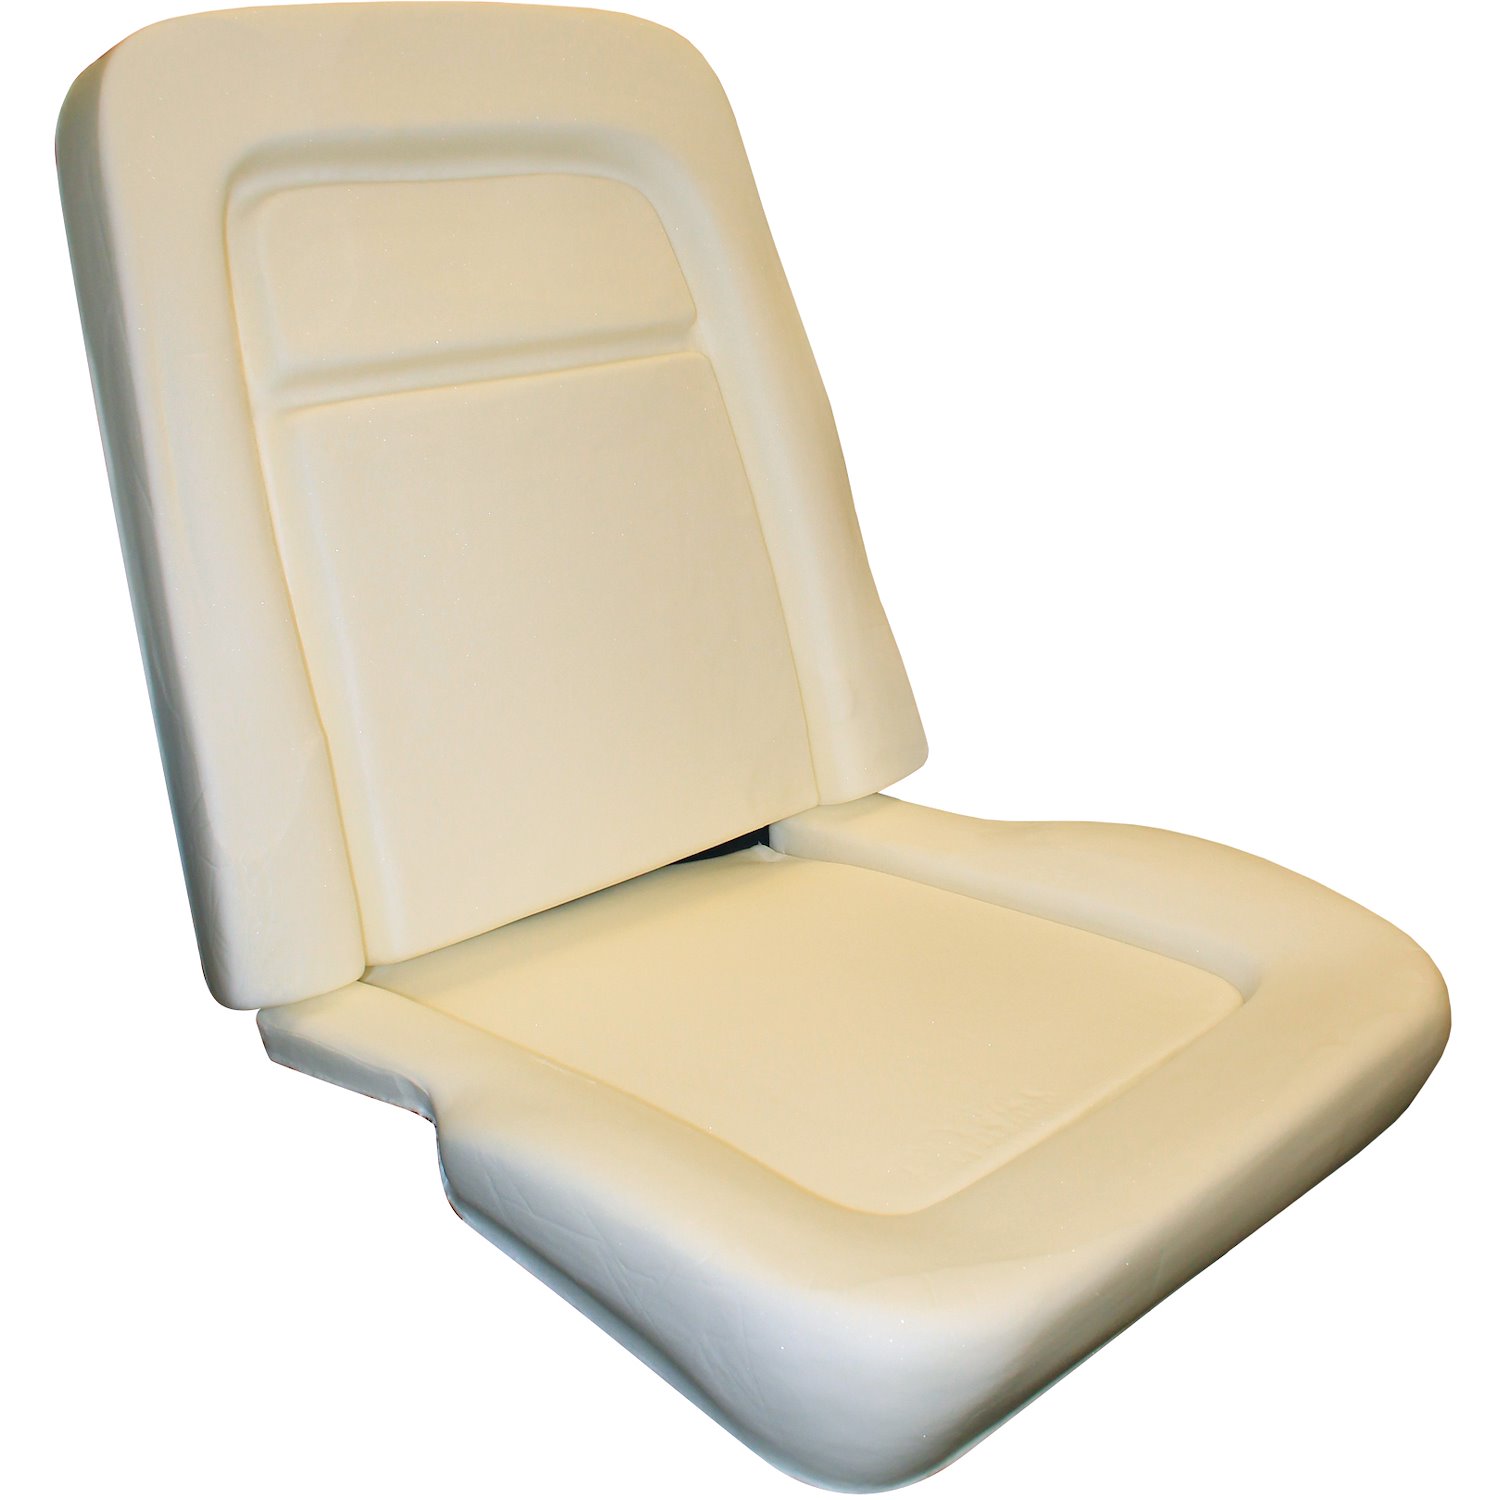 1968 Ford Mustang Standard Interior Front Bucket Seat Foam